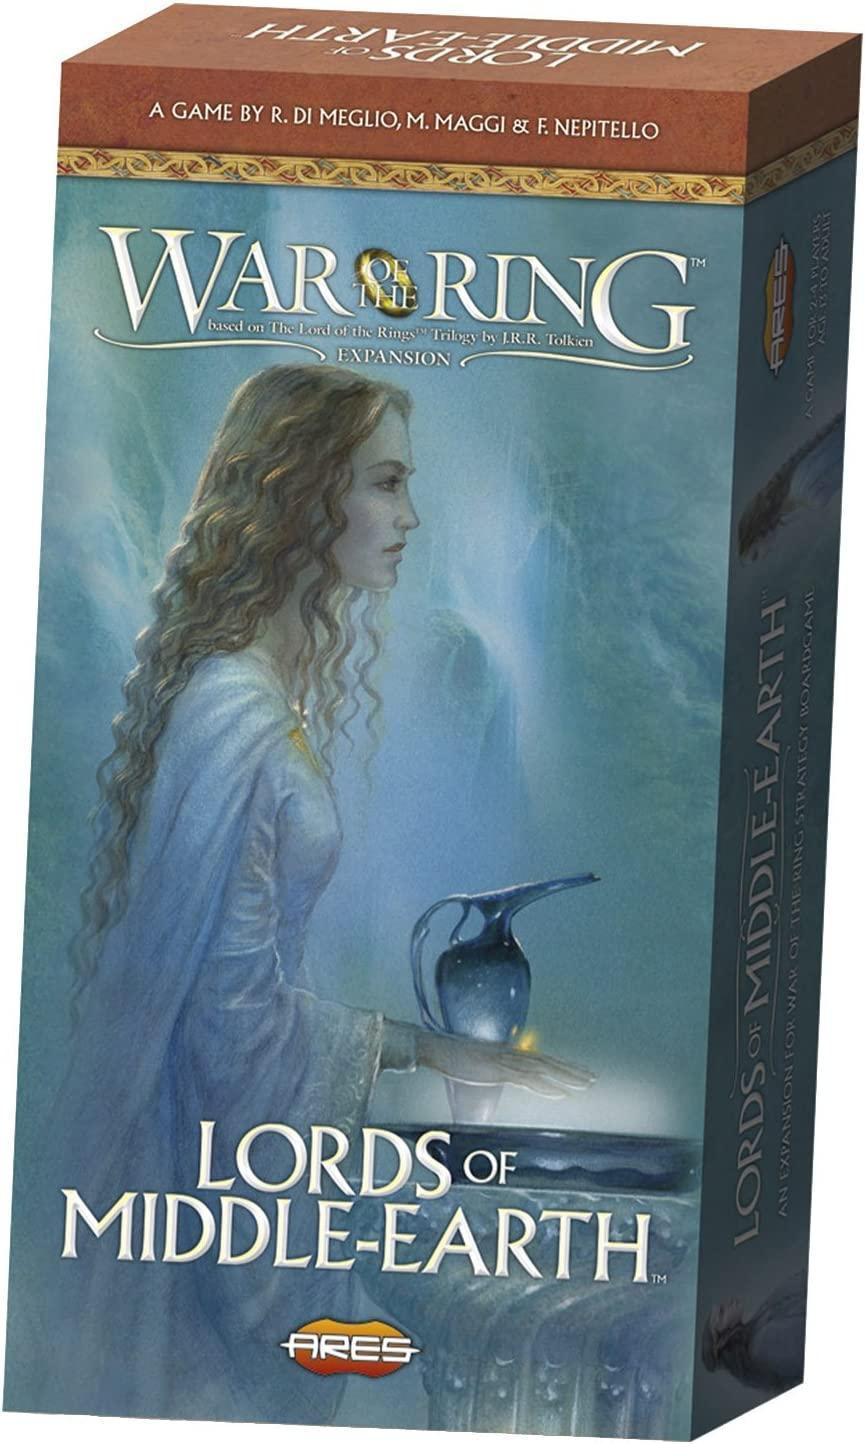 The War of the Ring: Lords of Middle-Earth